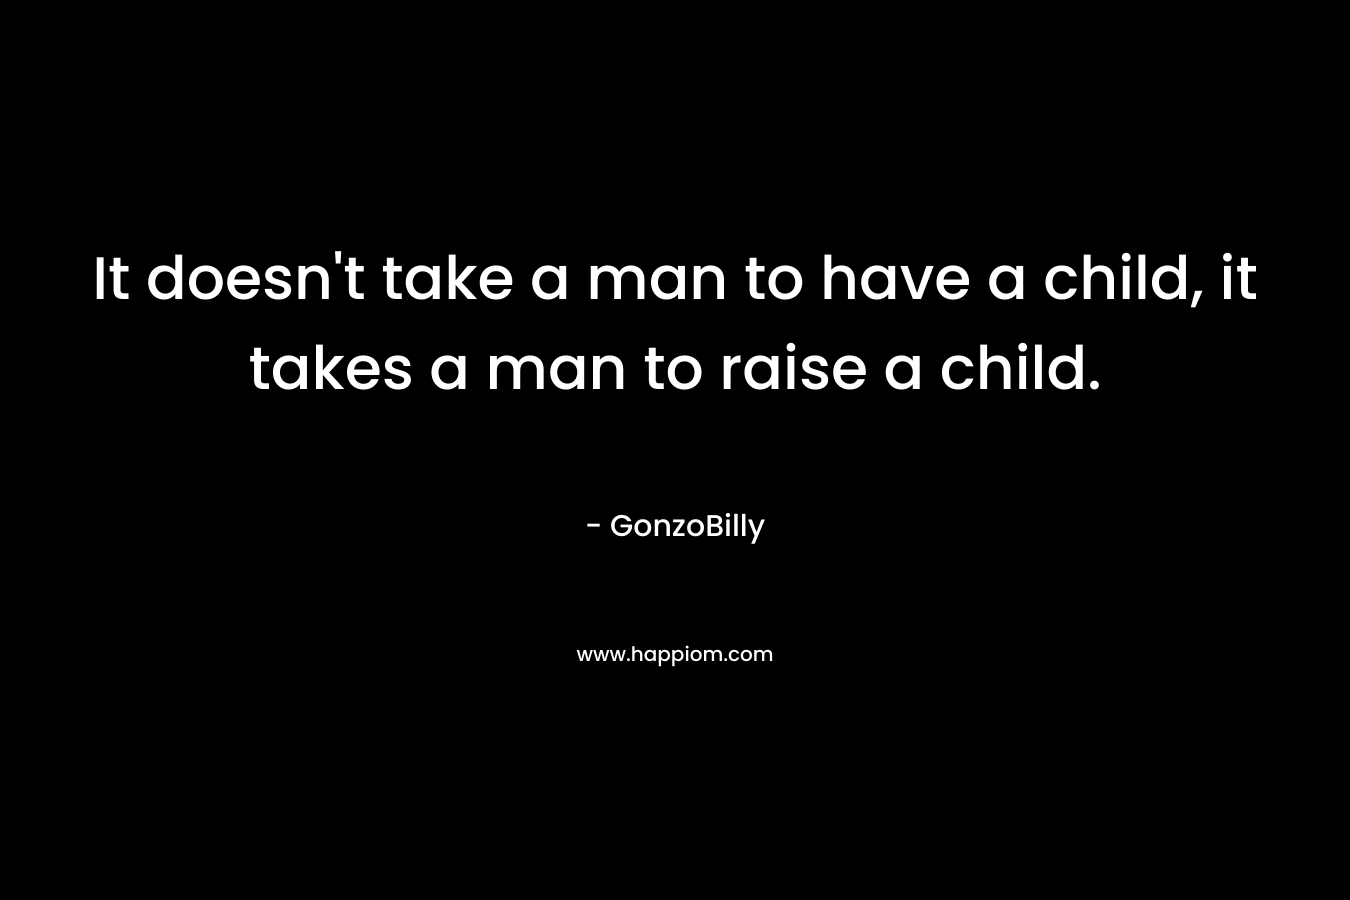 It doesn't take a man to have a child, it takes a man to raise a child.